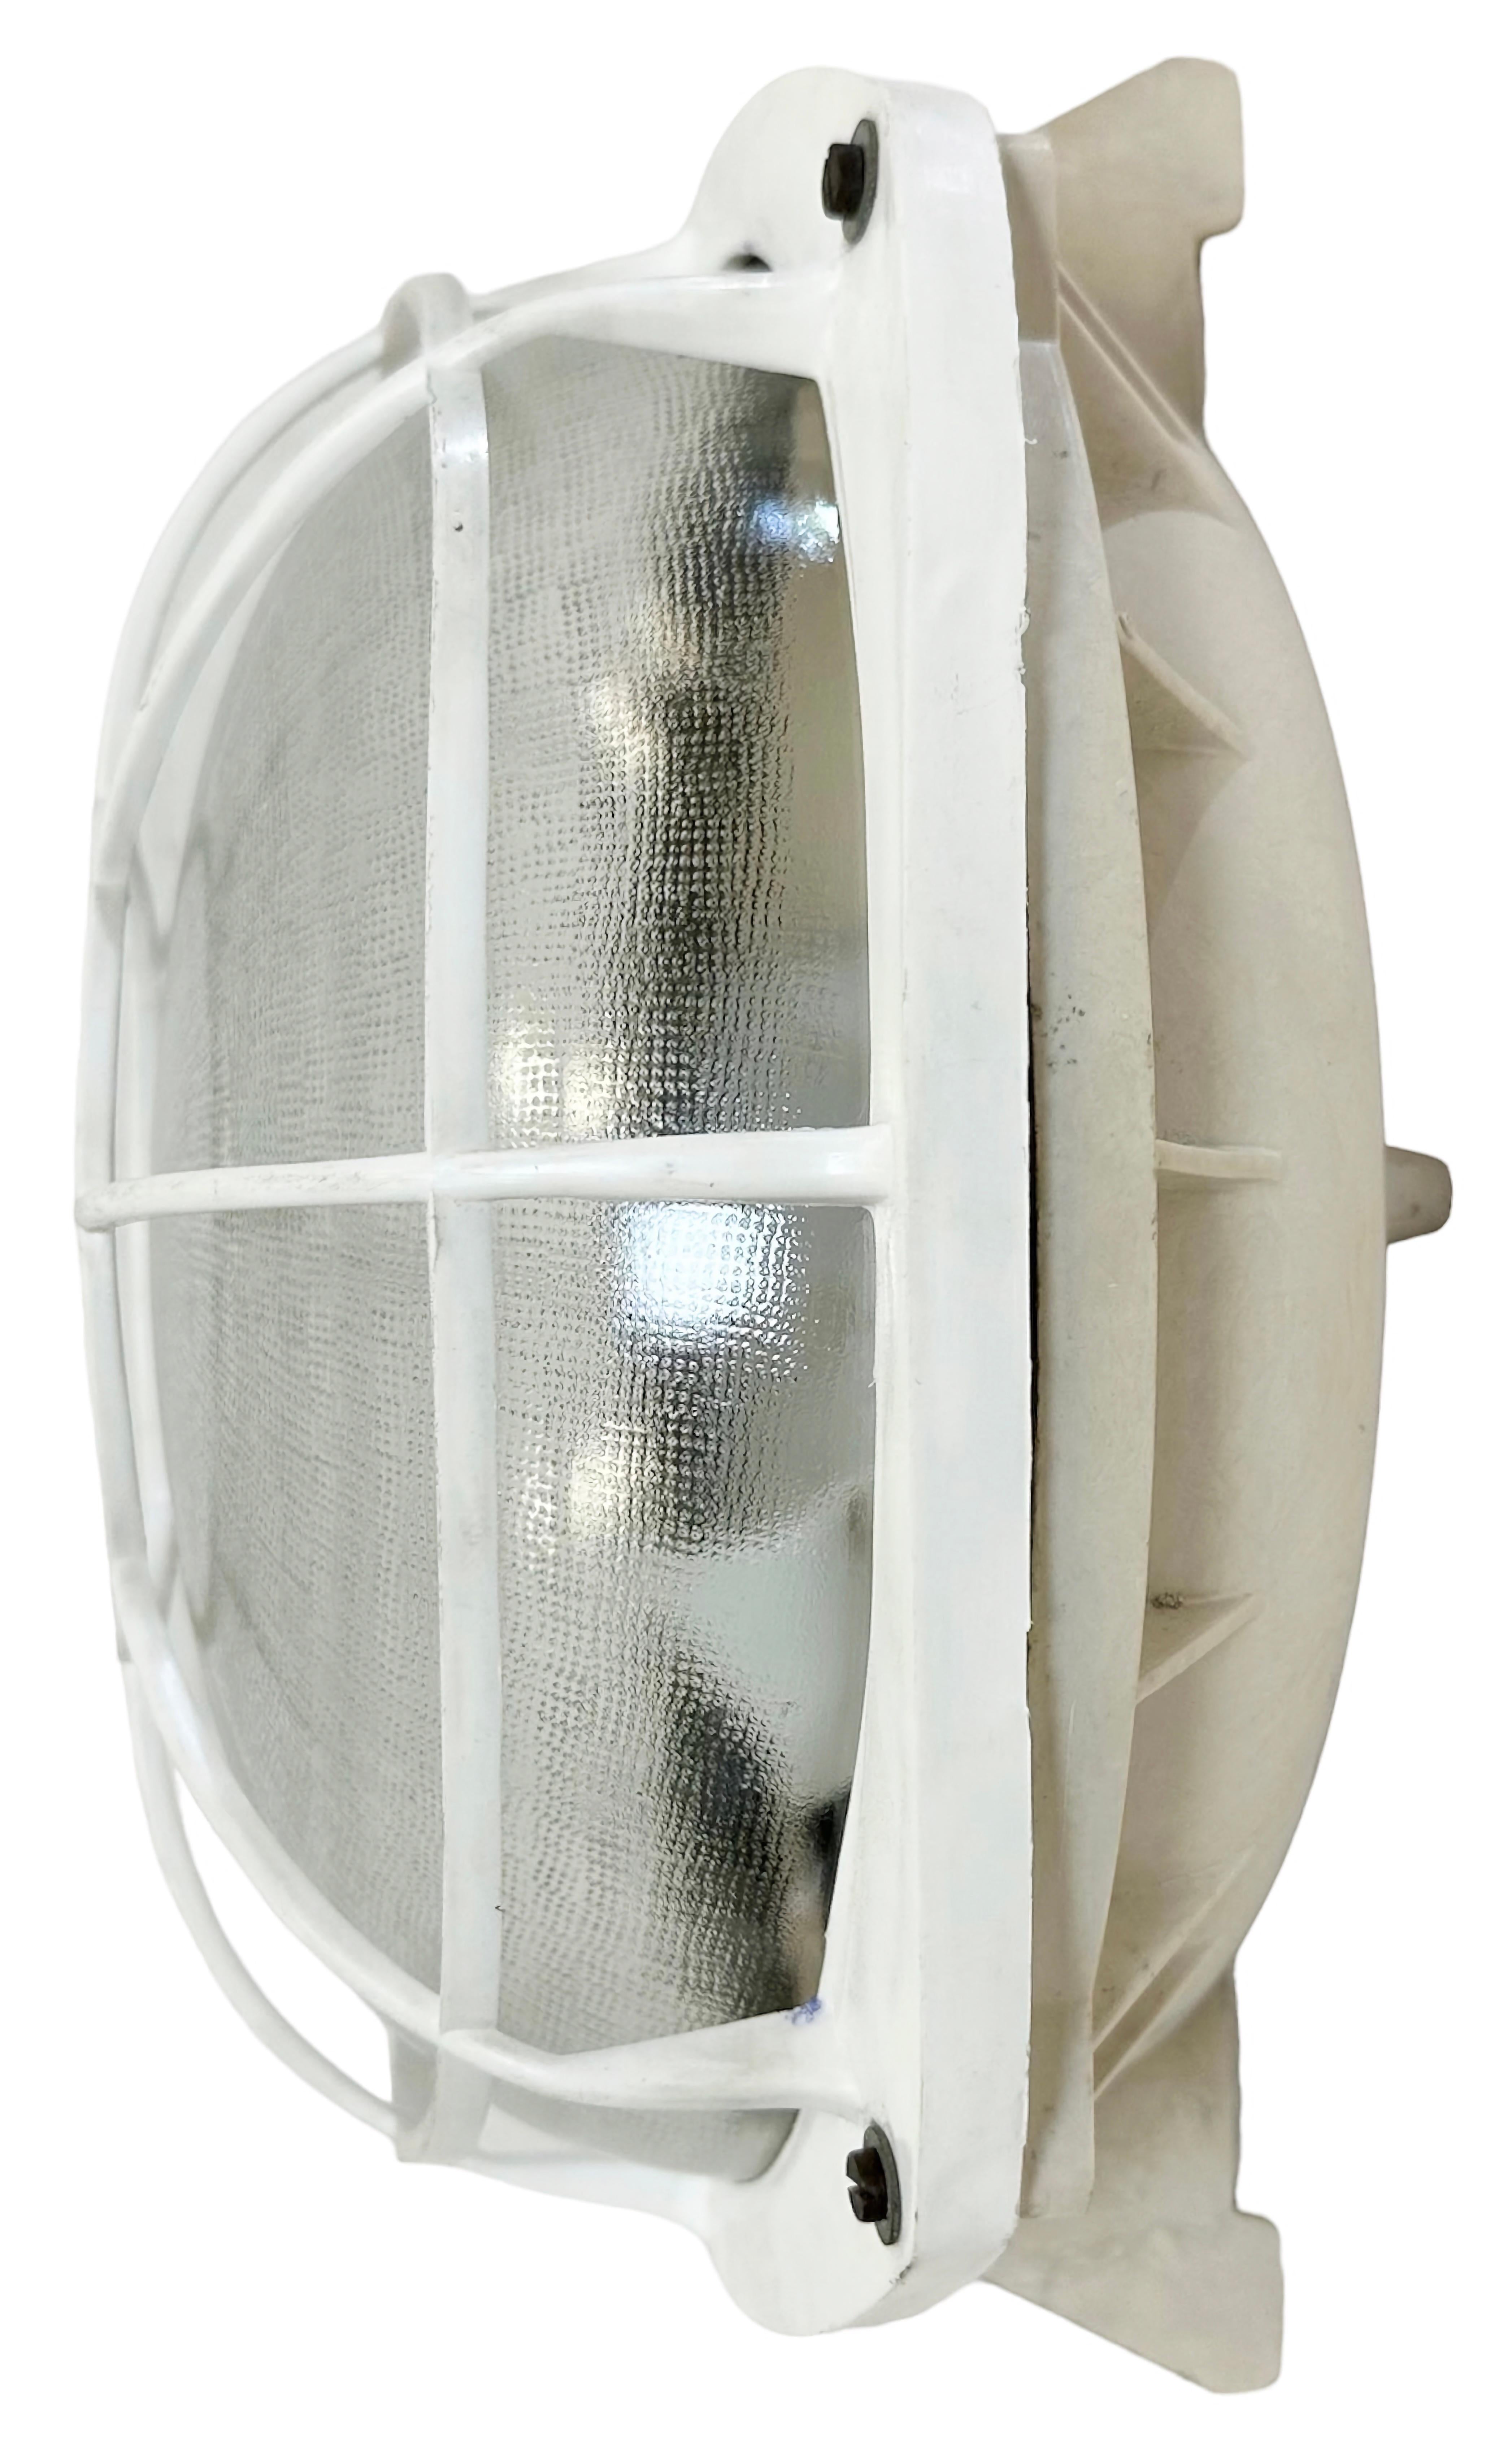 Vintage industrial white ( beige )bakelite wall lamp made by Elektrosvit in former Czechoslovakia during the 1980s. It features a bakelite body, a frosted curved glass cover and bakelite grid.The socket requires standard E 27 / E 26 light bulbs. It